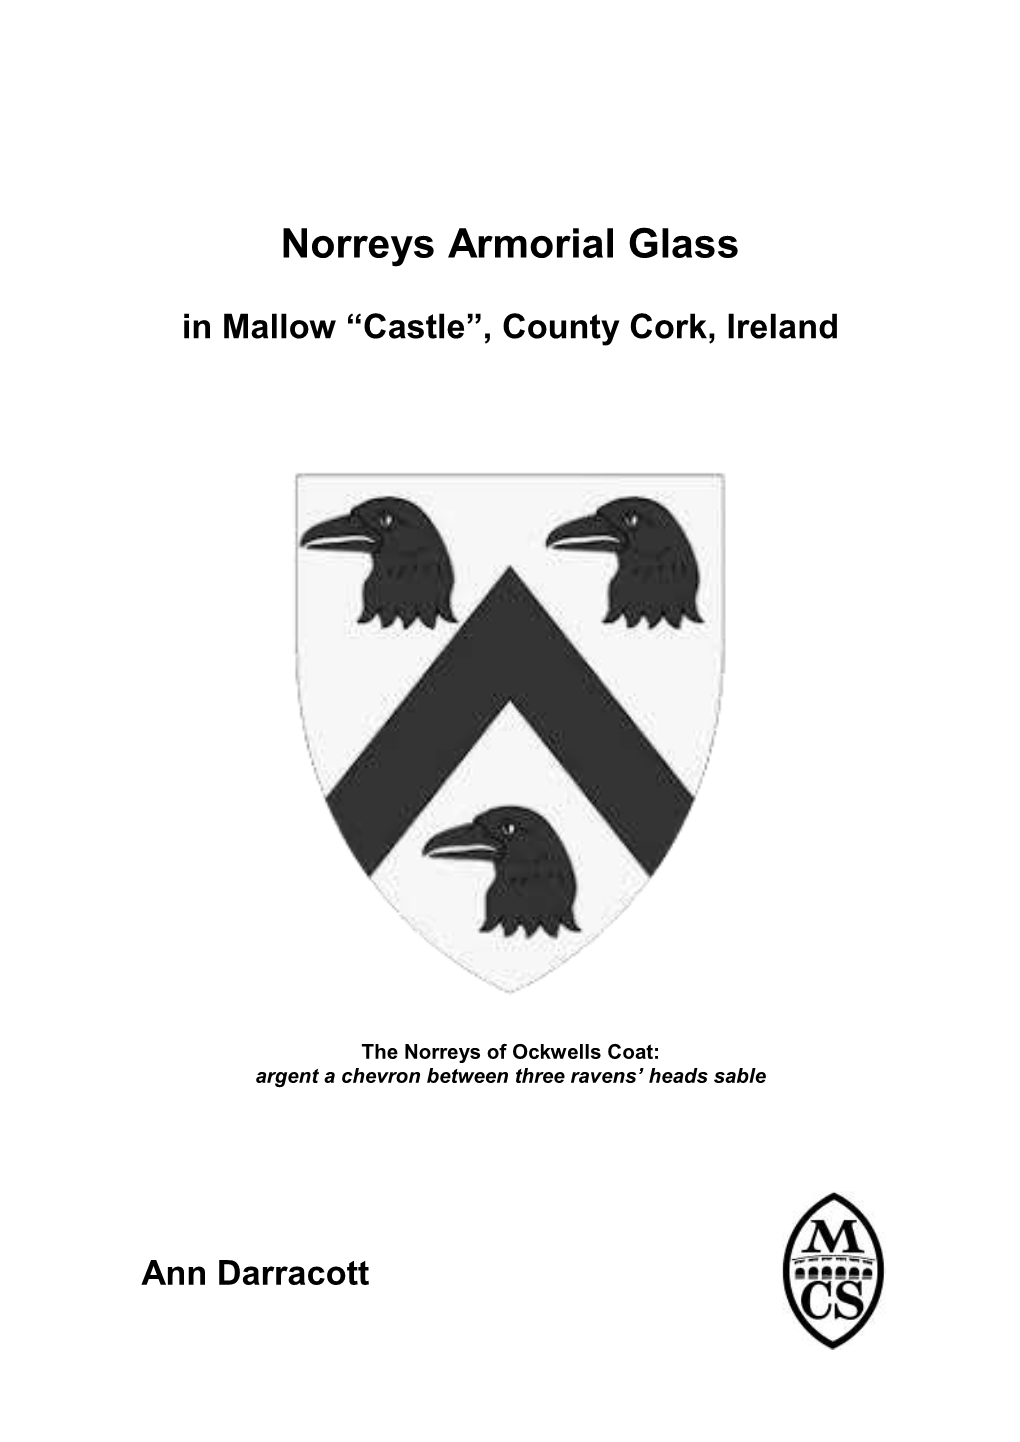 Norreys Armorial Glass in Mallow Castle